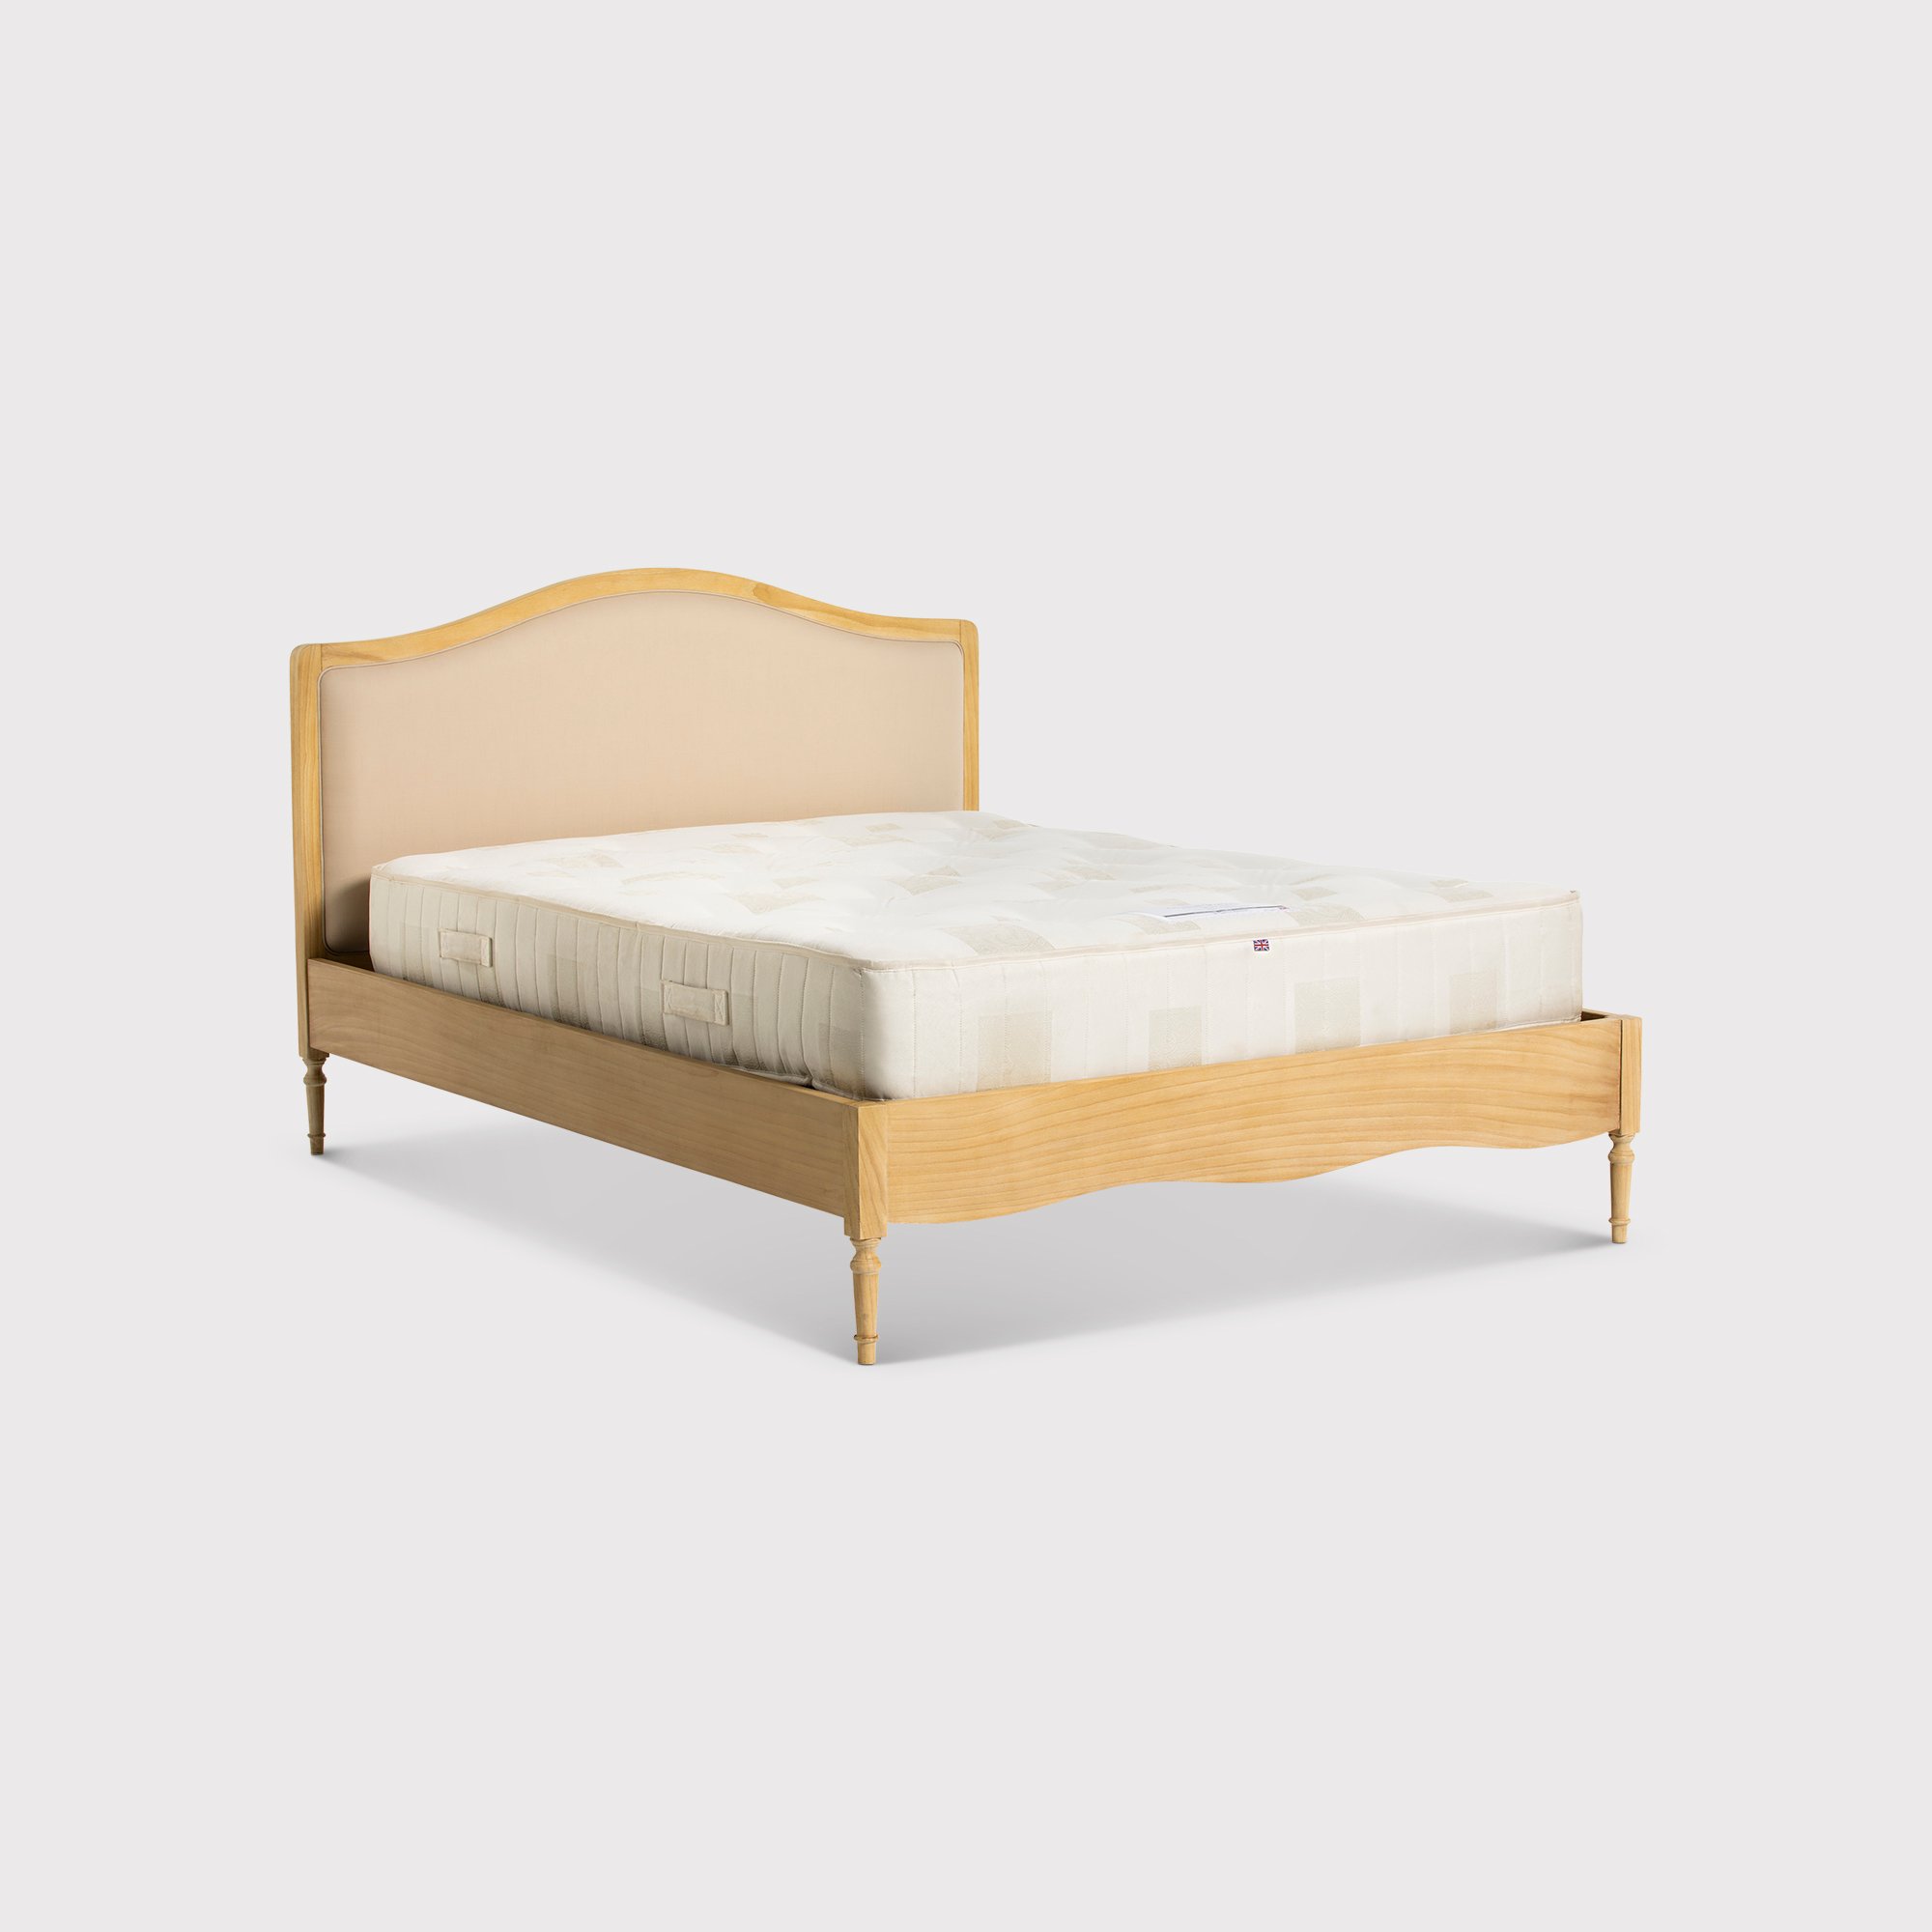 Cecile 150cm Low Footboard Uph Bed, Neutral Wood | King | Barker & Stonehouse